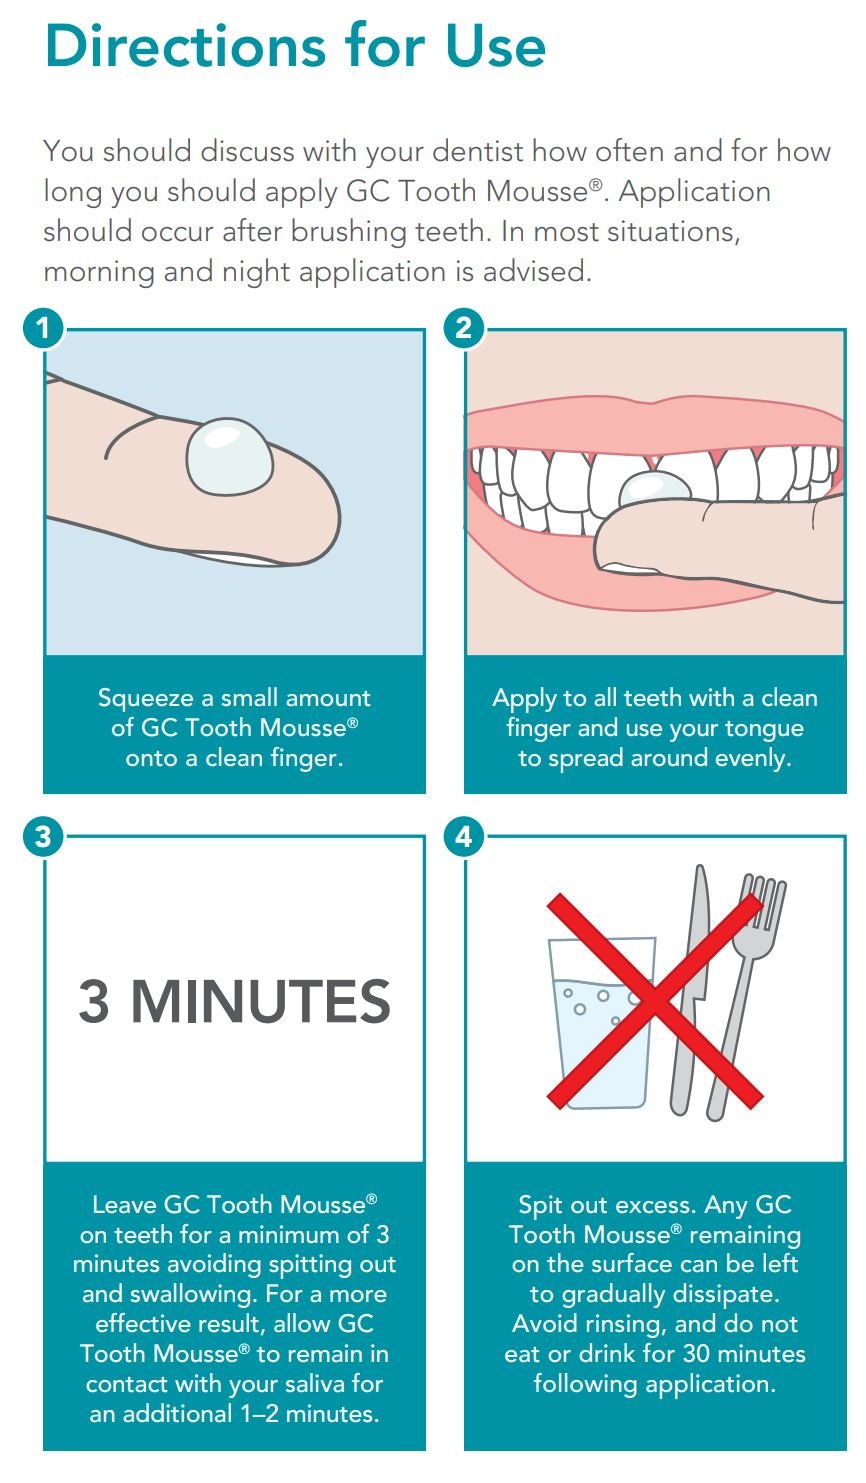 https://www.dentalworldofficial.com/wp-content/uploads/2021/03/how-to-use-gc-tooth-mousse.jpg